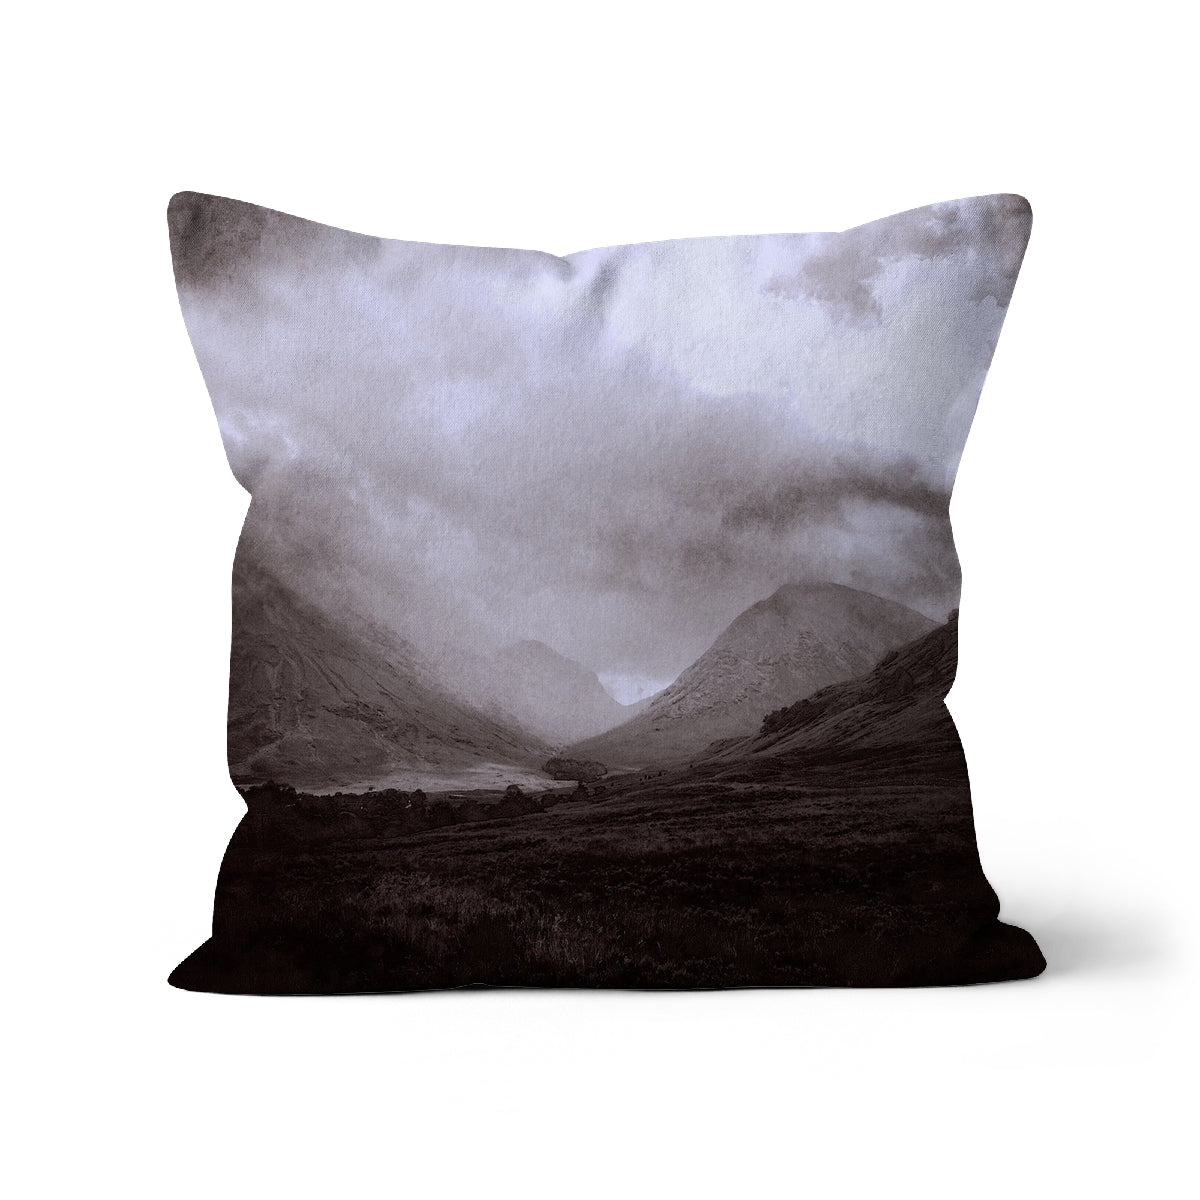 Glencoe Mist Art Gifts Cushion-Cushions-Glencoe Art Gallery-Faux Suede-18"x18"-Paintings, Prints, Homeware, Art Gifts From Scotland By Scottish Artist Kevin Hunter